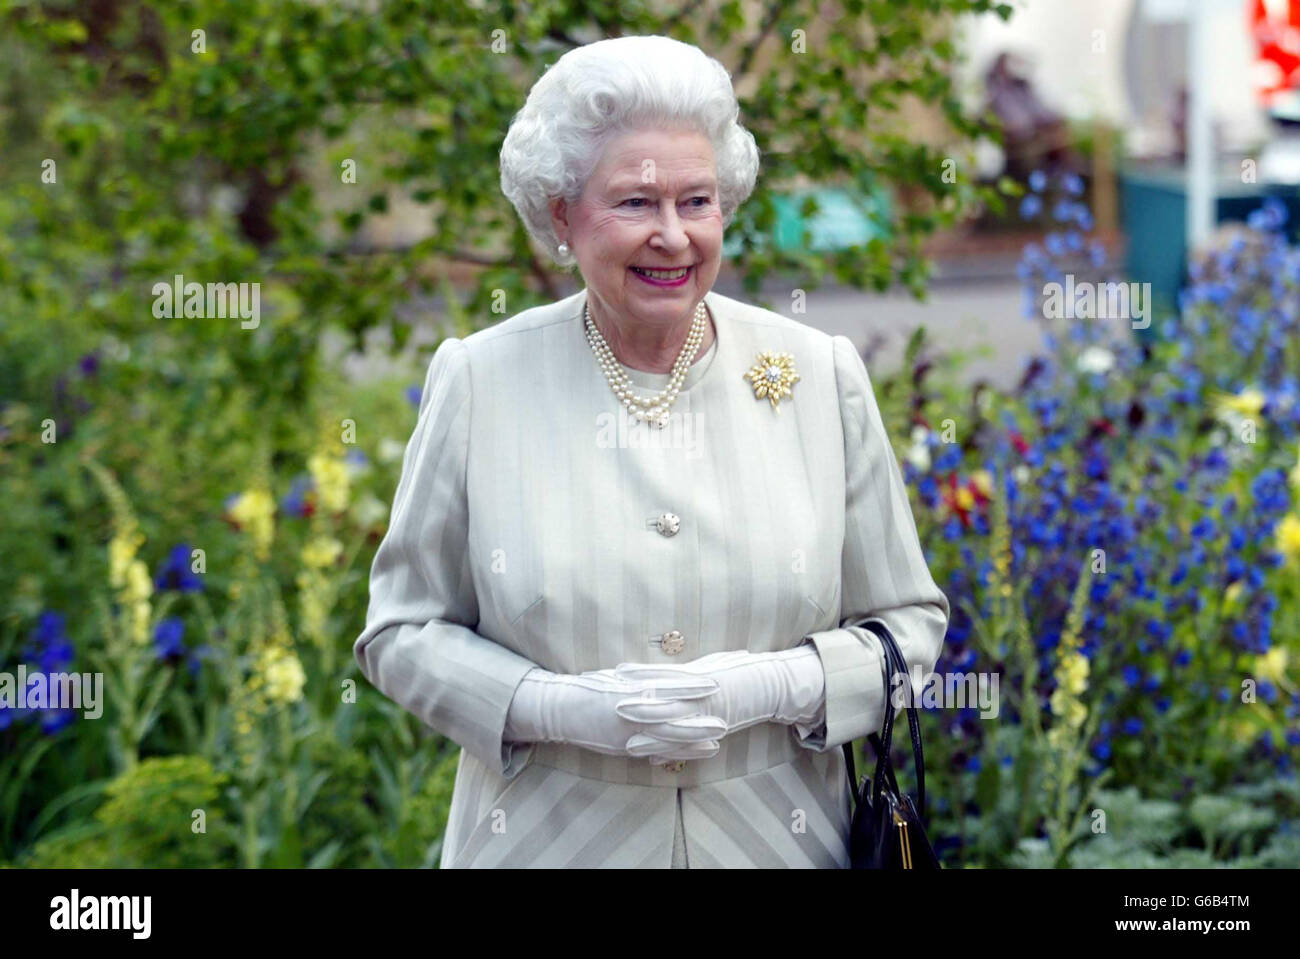 Queen Elizabeth II visits the Royal Horticultural Society's Chelsea Flower Show in London. Stock Photo